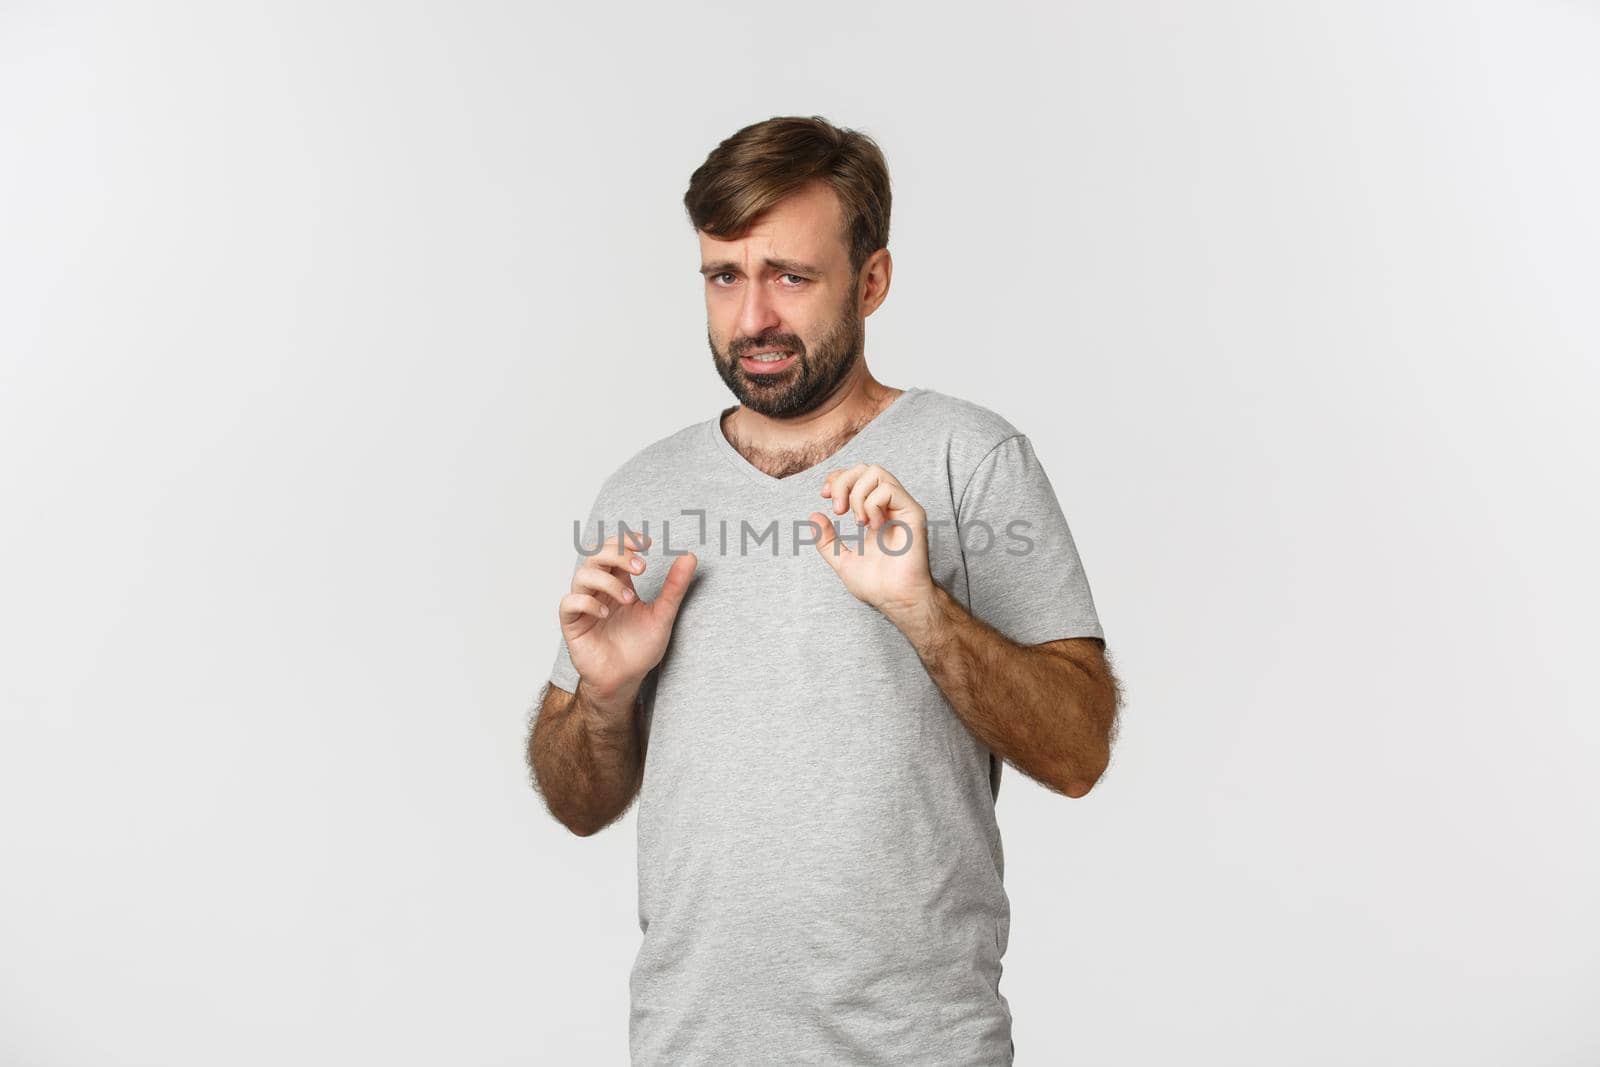 Portrait of timid and scared man in gray t-shirt, raising hands to defend himself, looking frightened, standing over white background.